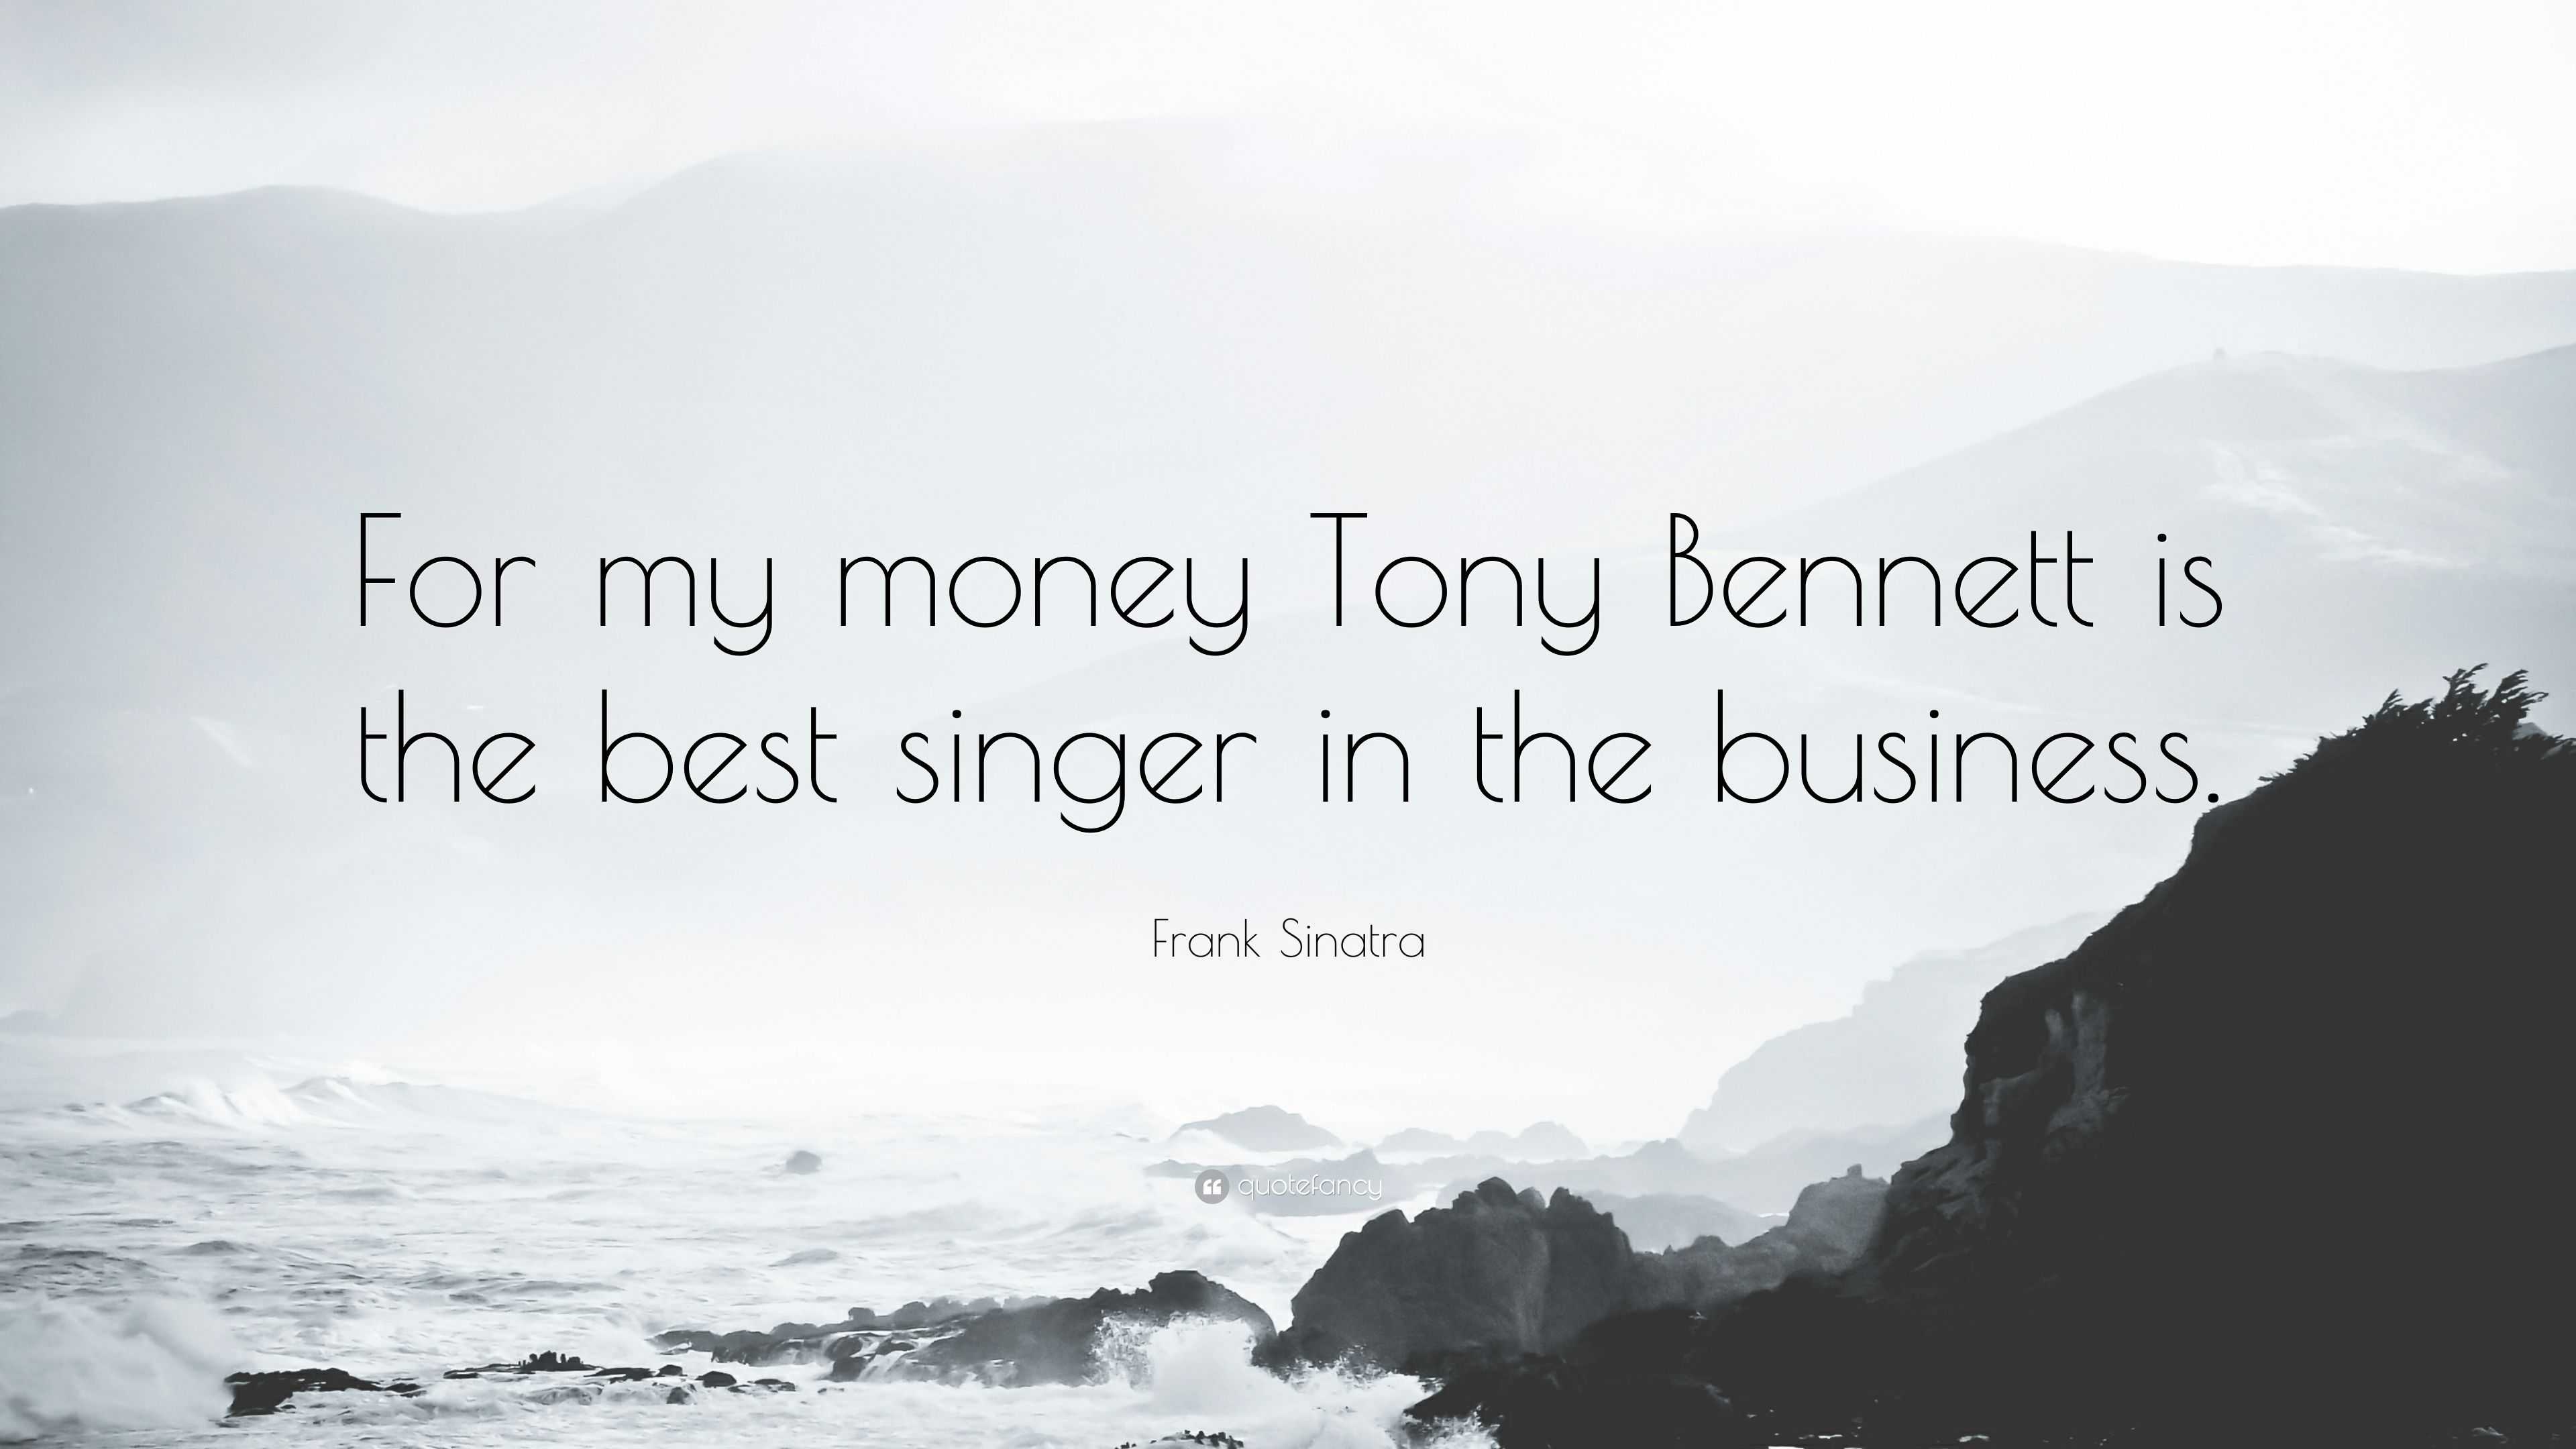 The Best Is Yet to Come Tony Bennett Frank Sinatra Download Printable Art The Best Print FRANK SINATRA QUOTE